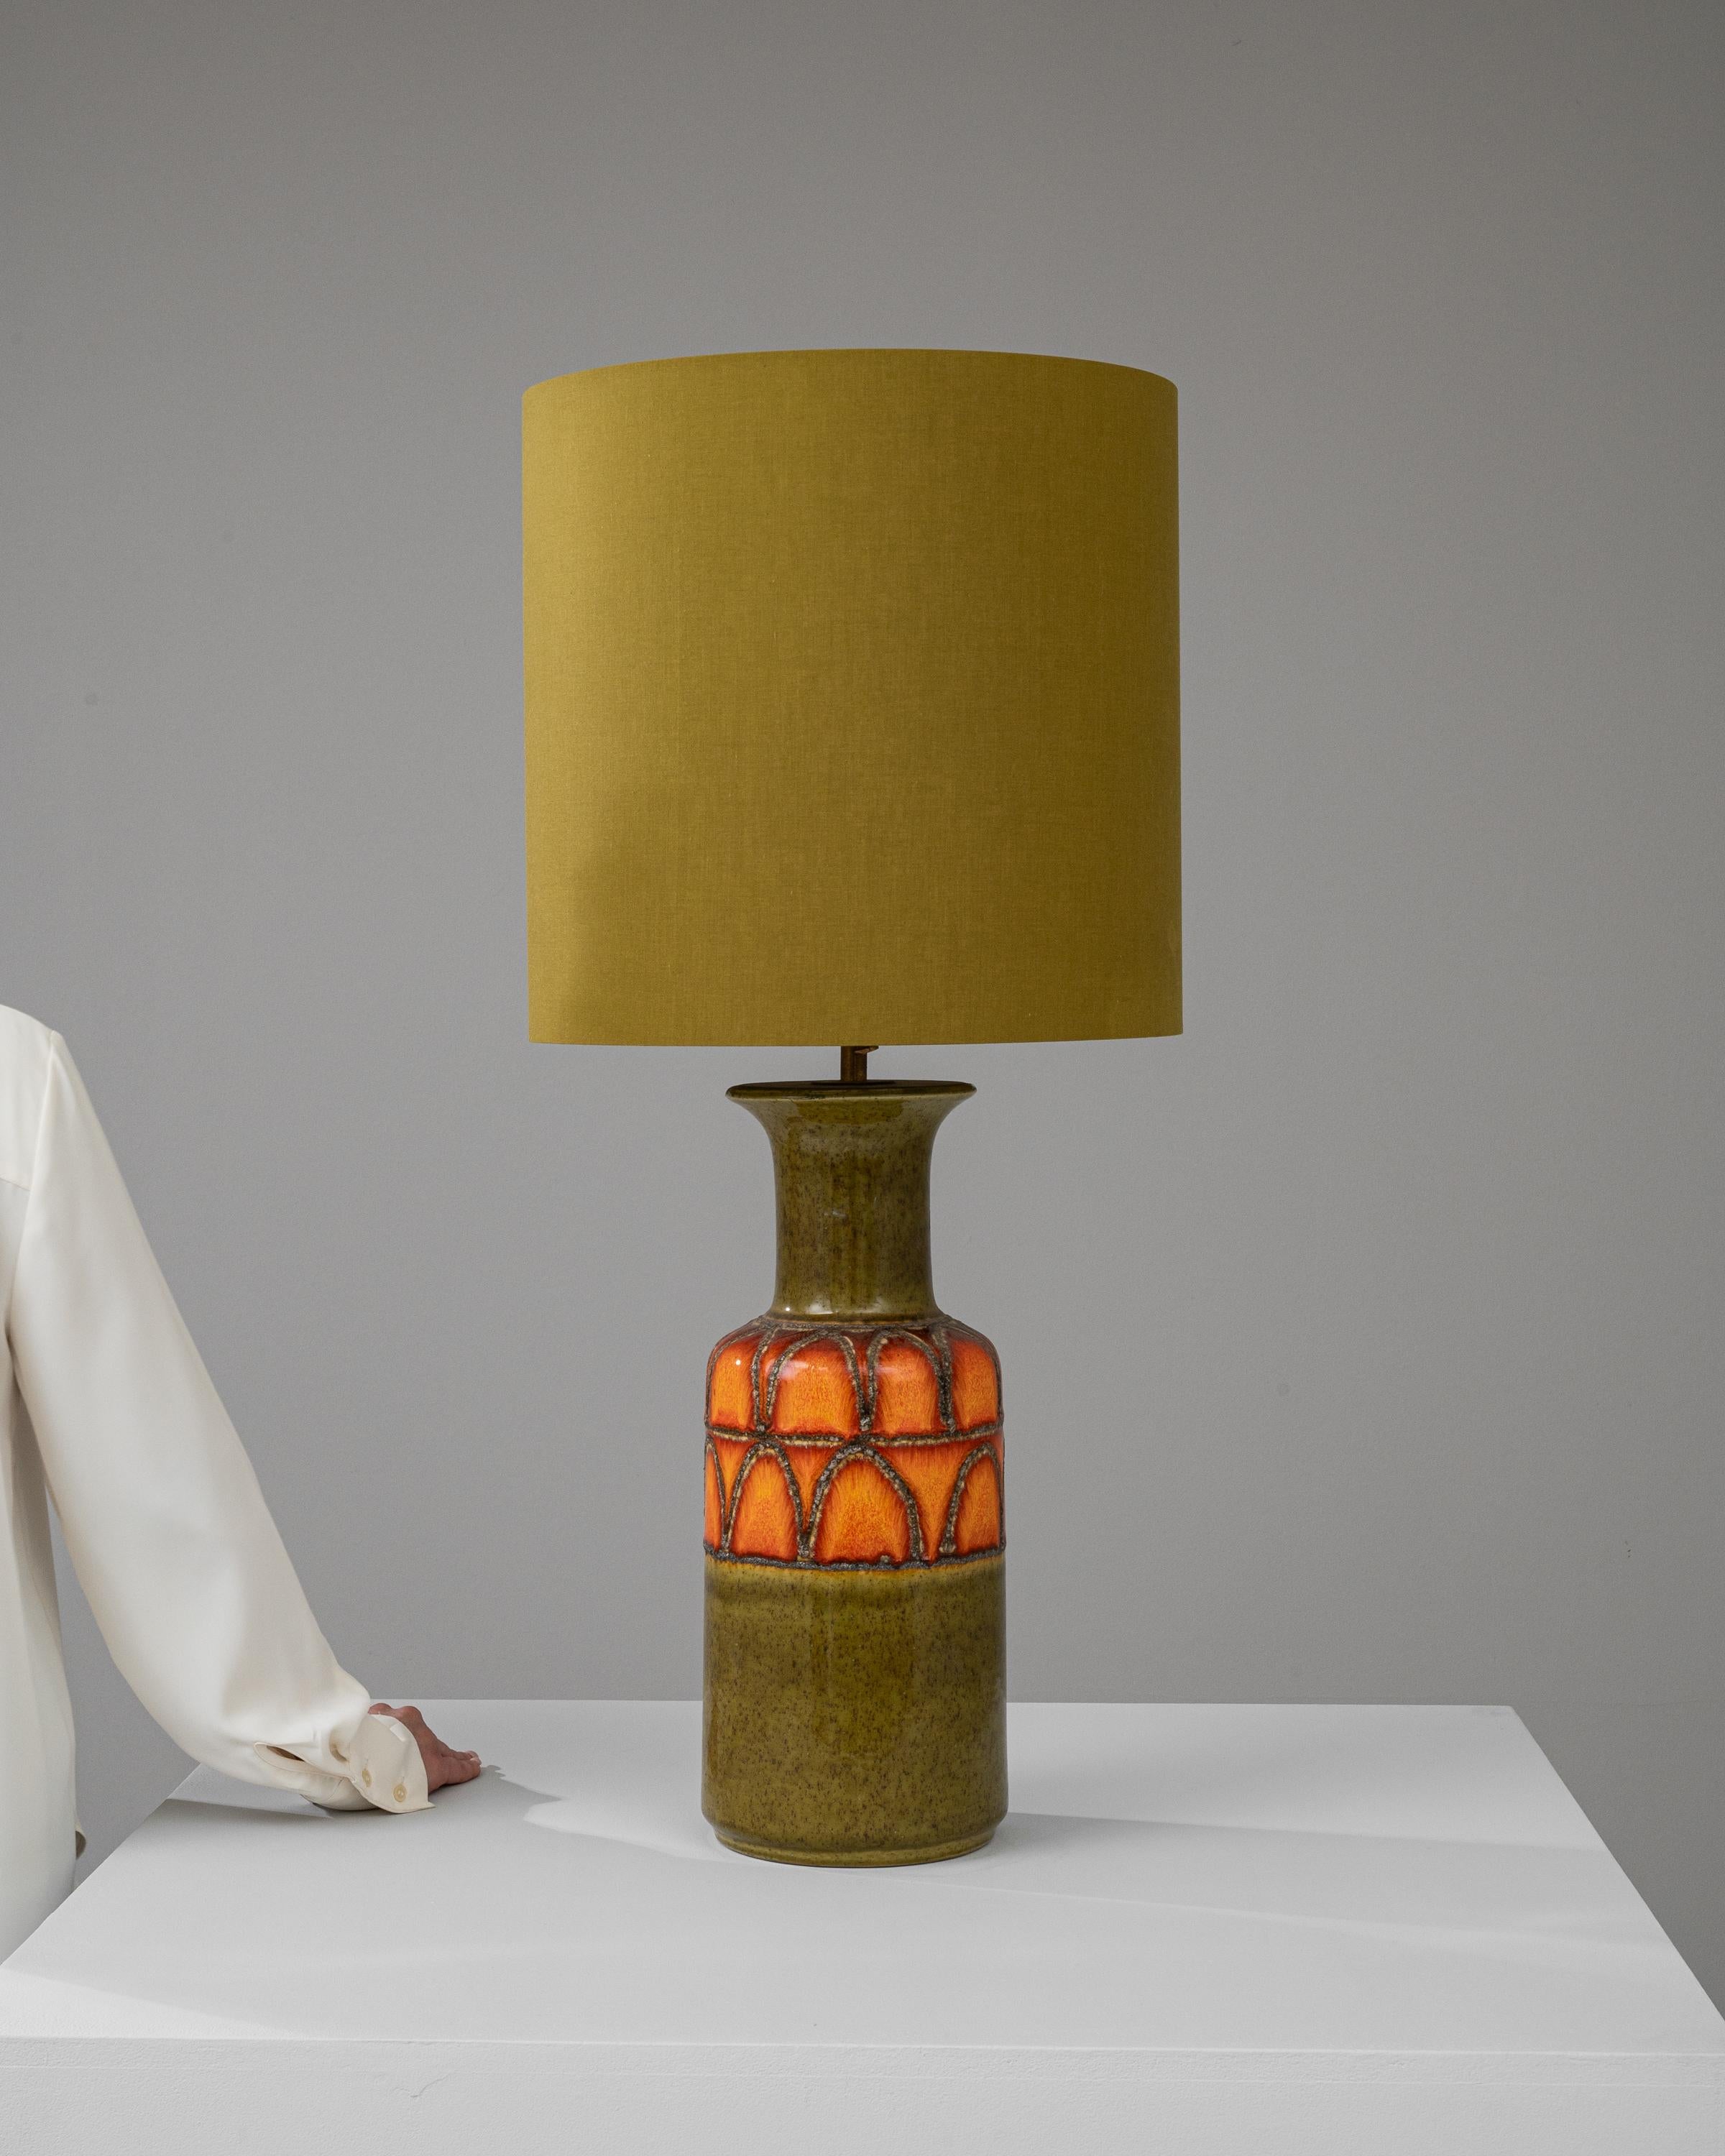 Elevate your home decor with the vibrant allure of this 20th Century German Ceramic Table Lamp, a true emblem of retro-chic style. The lamp's base captivates with its bold, fiery orange hue set against an organic olive background, creating a